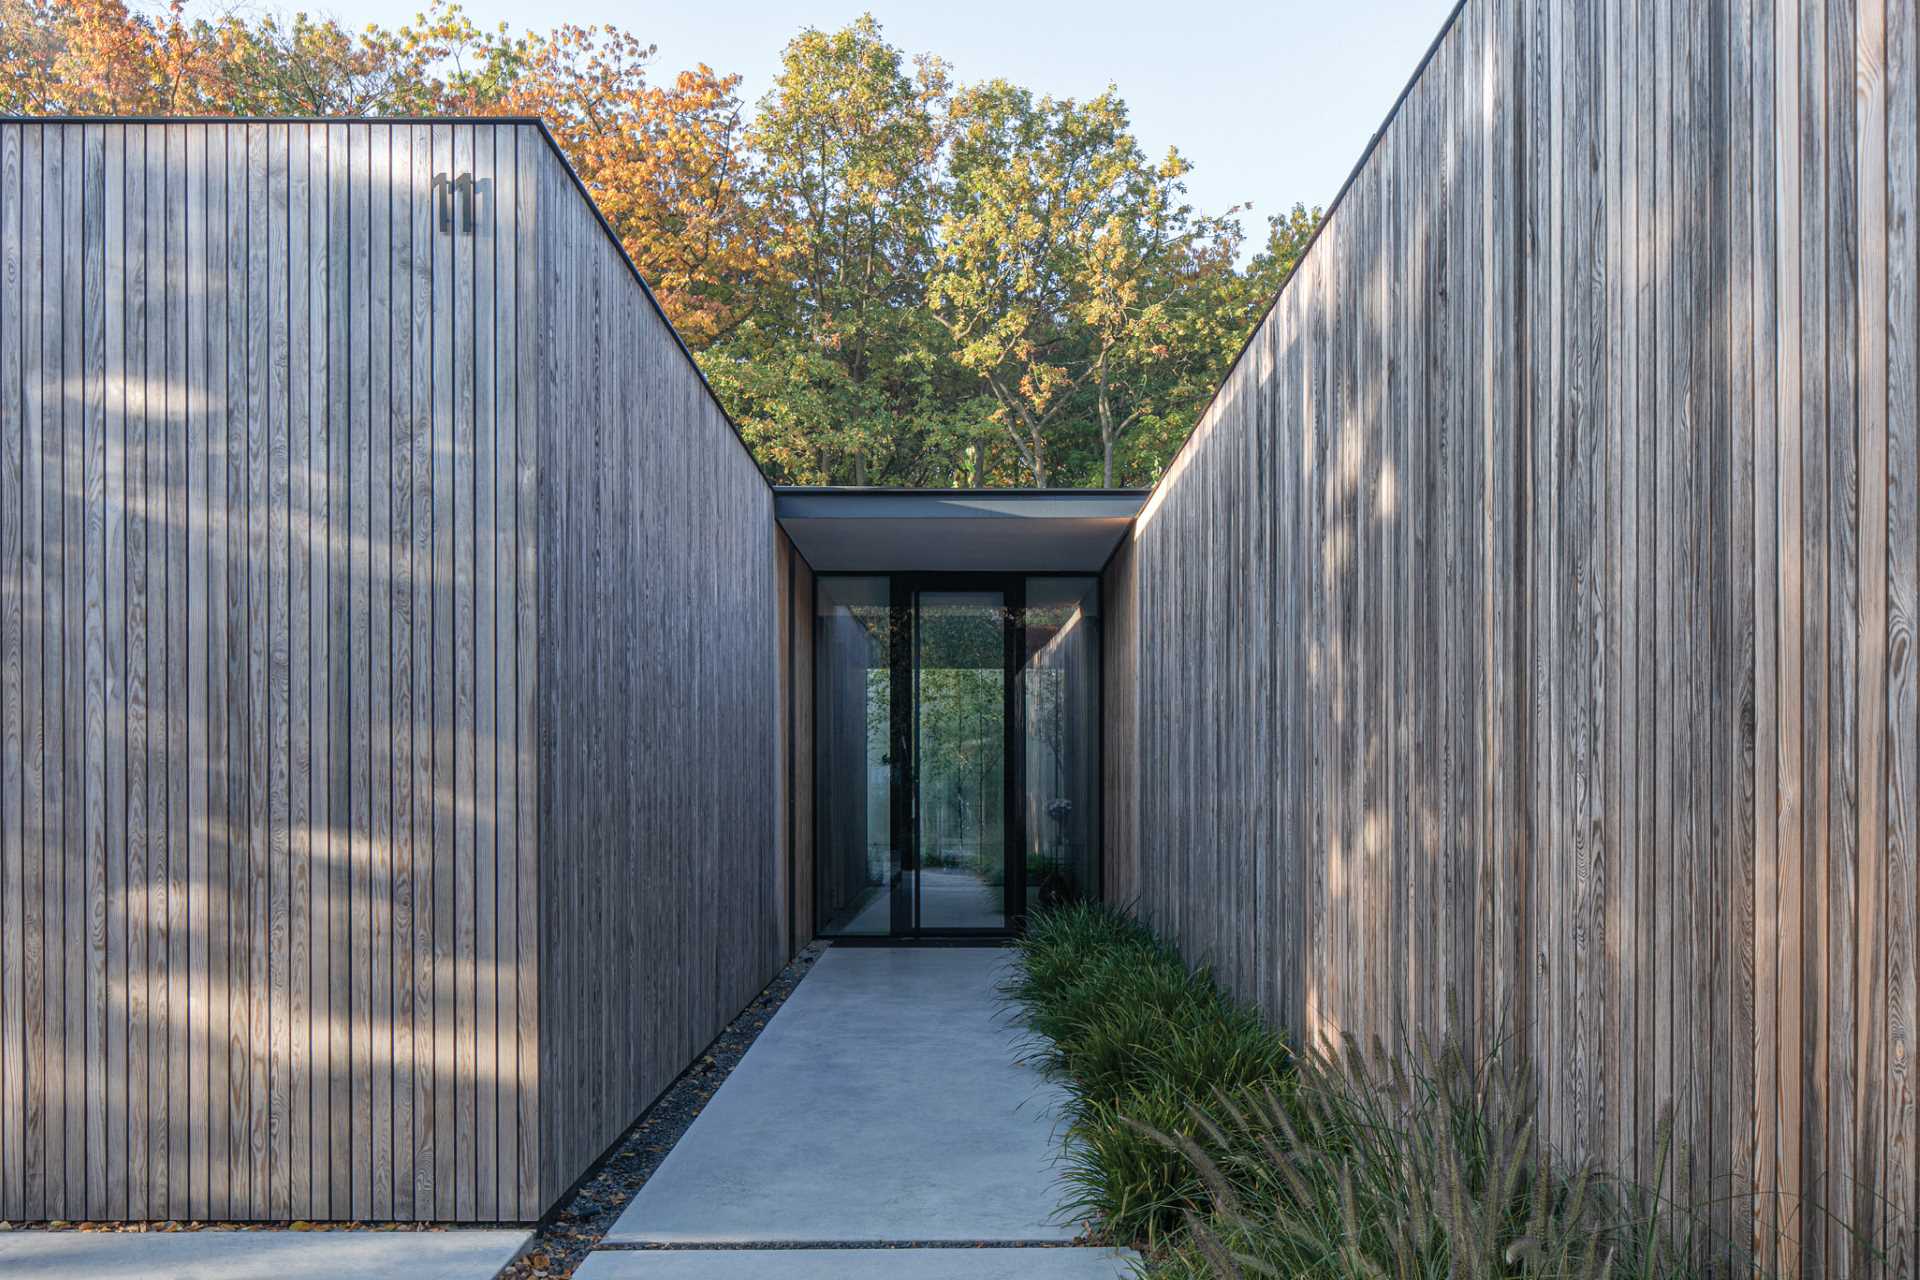 This modern house with its vertical wood facade, blends discreetly into the surrounding dense forest.